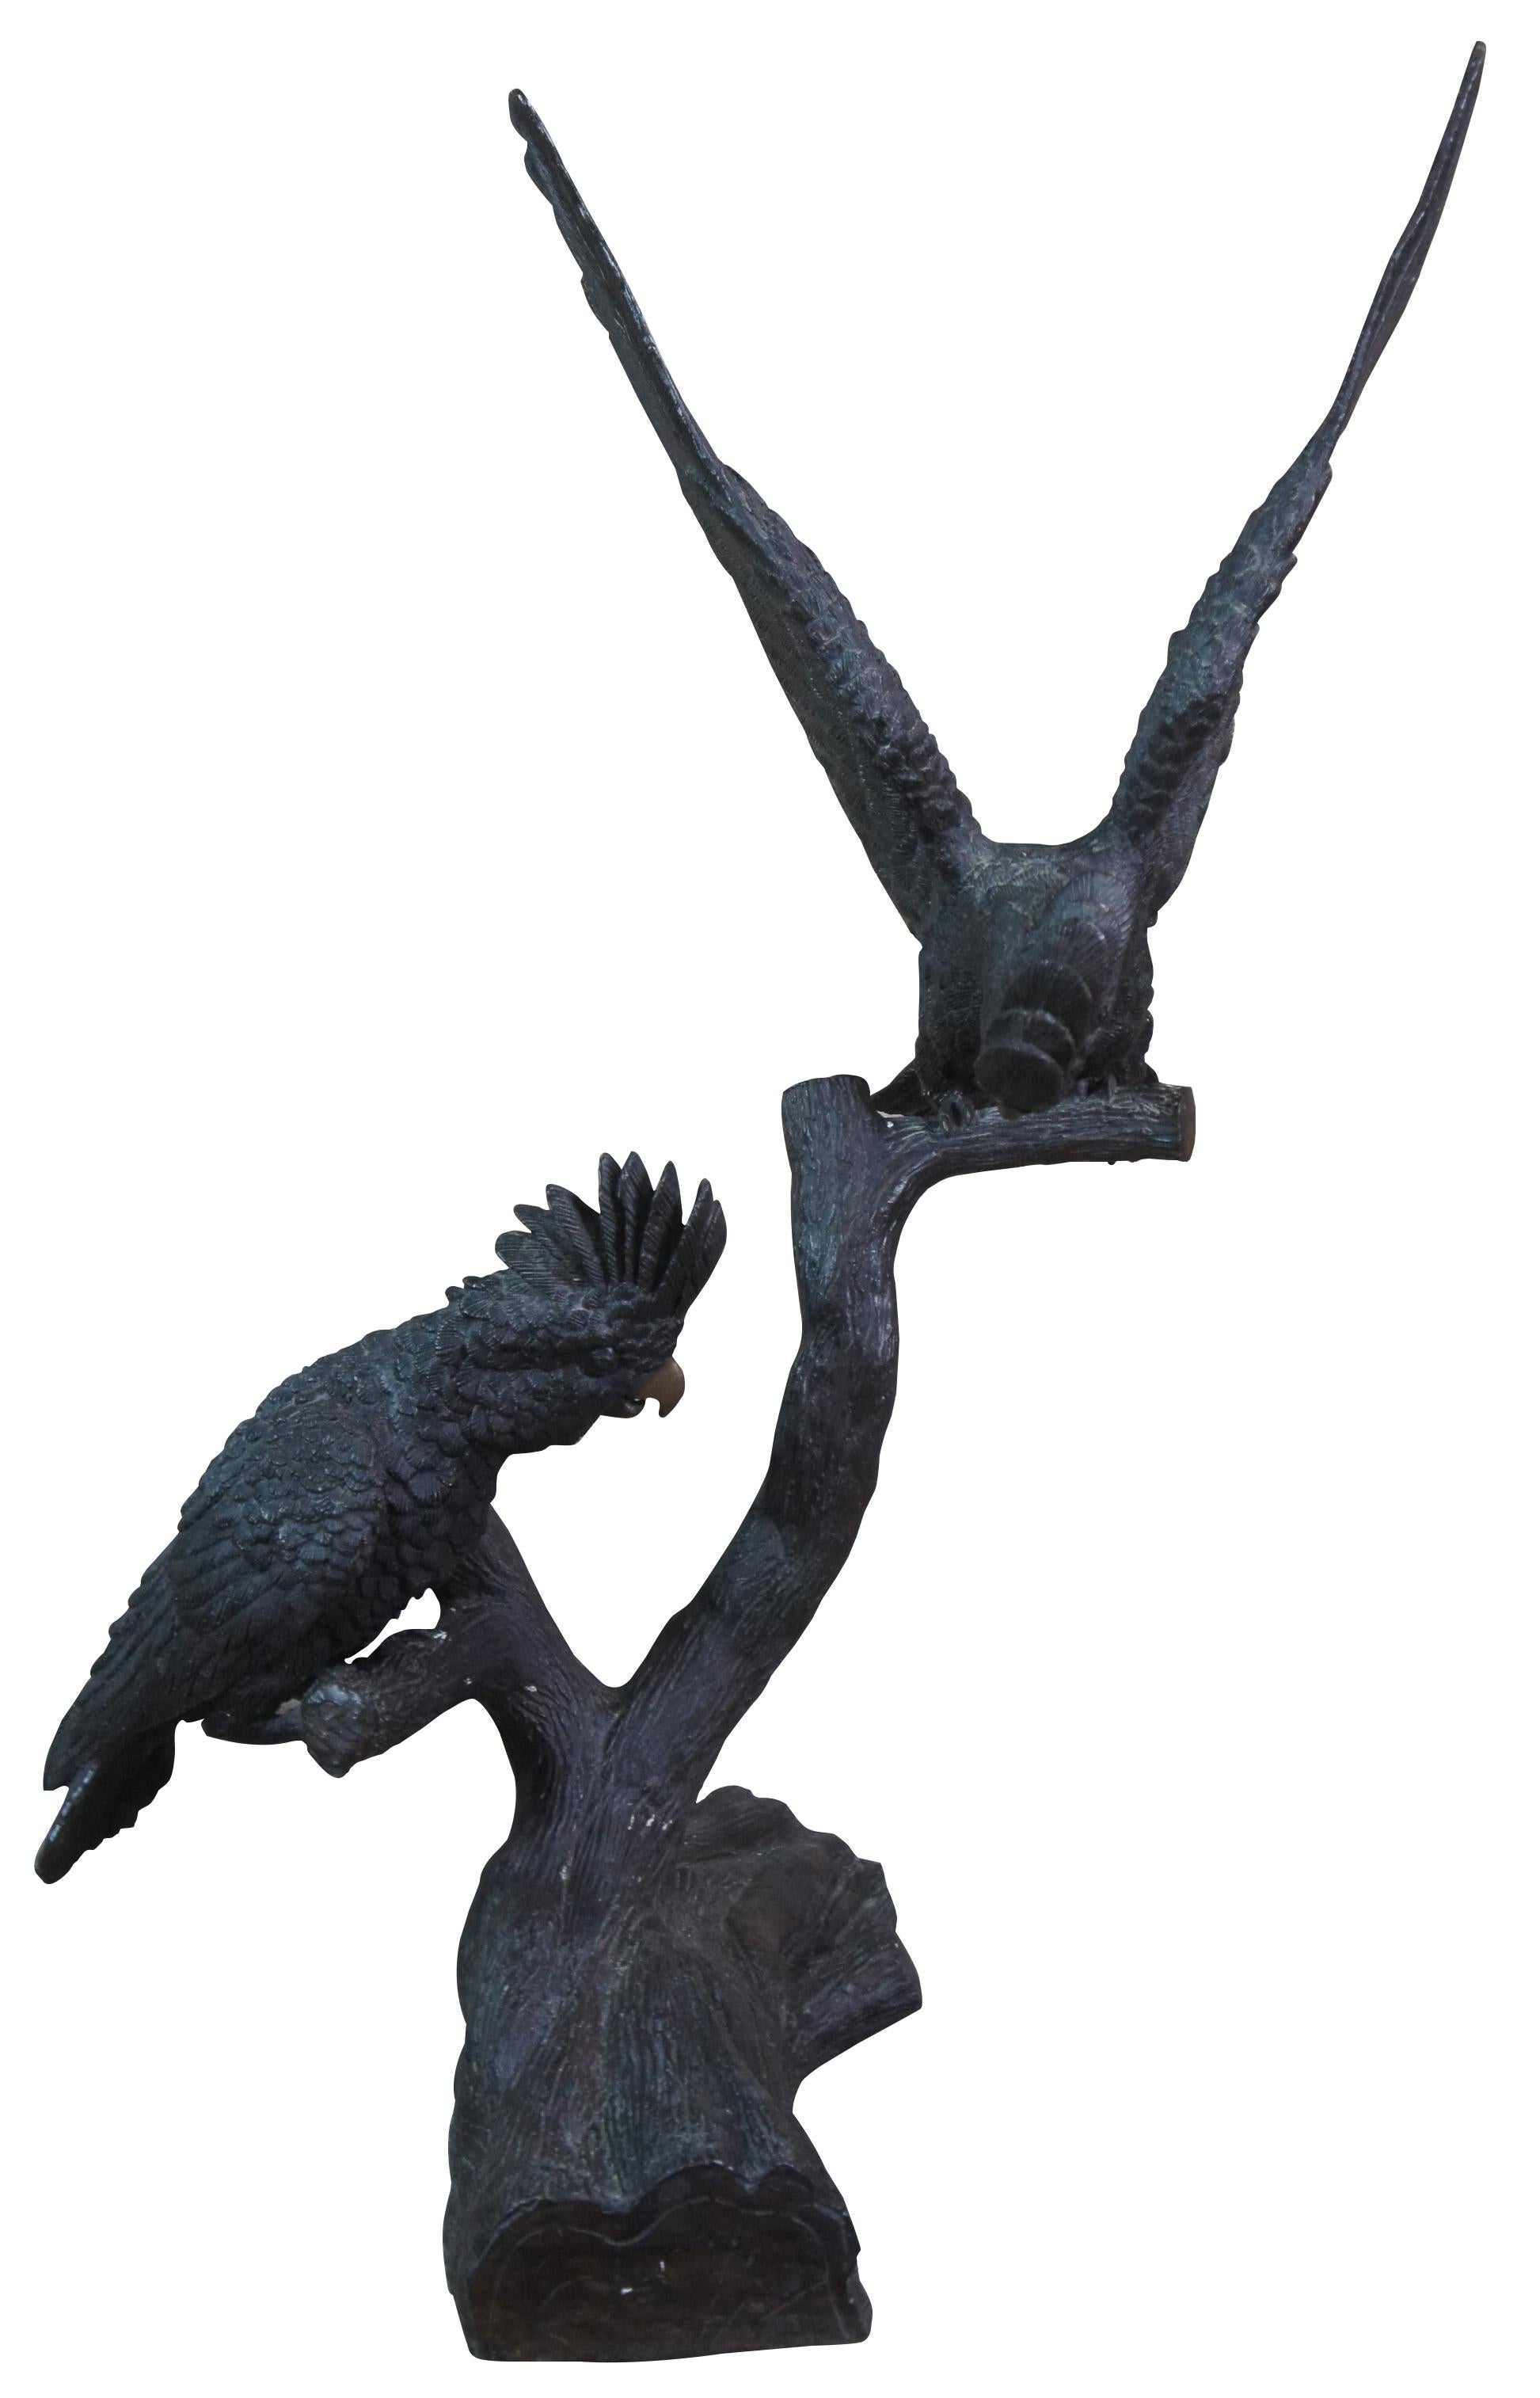 Mid 20th century French bronze cockatoos / parrots or birds. This life size art sculpture features a mated pair perched on a tree branch or log with realistic feathers, beaks and eyes. Made from the 